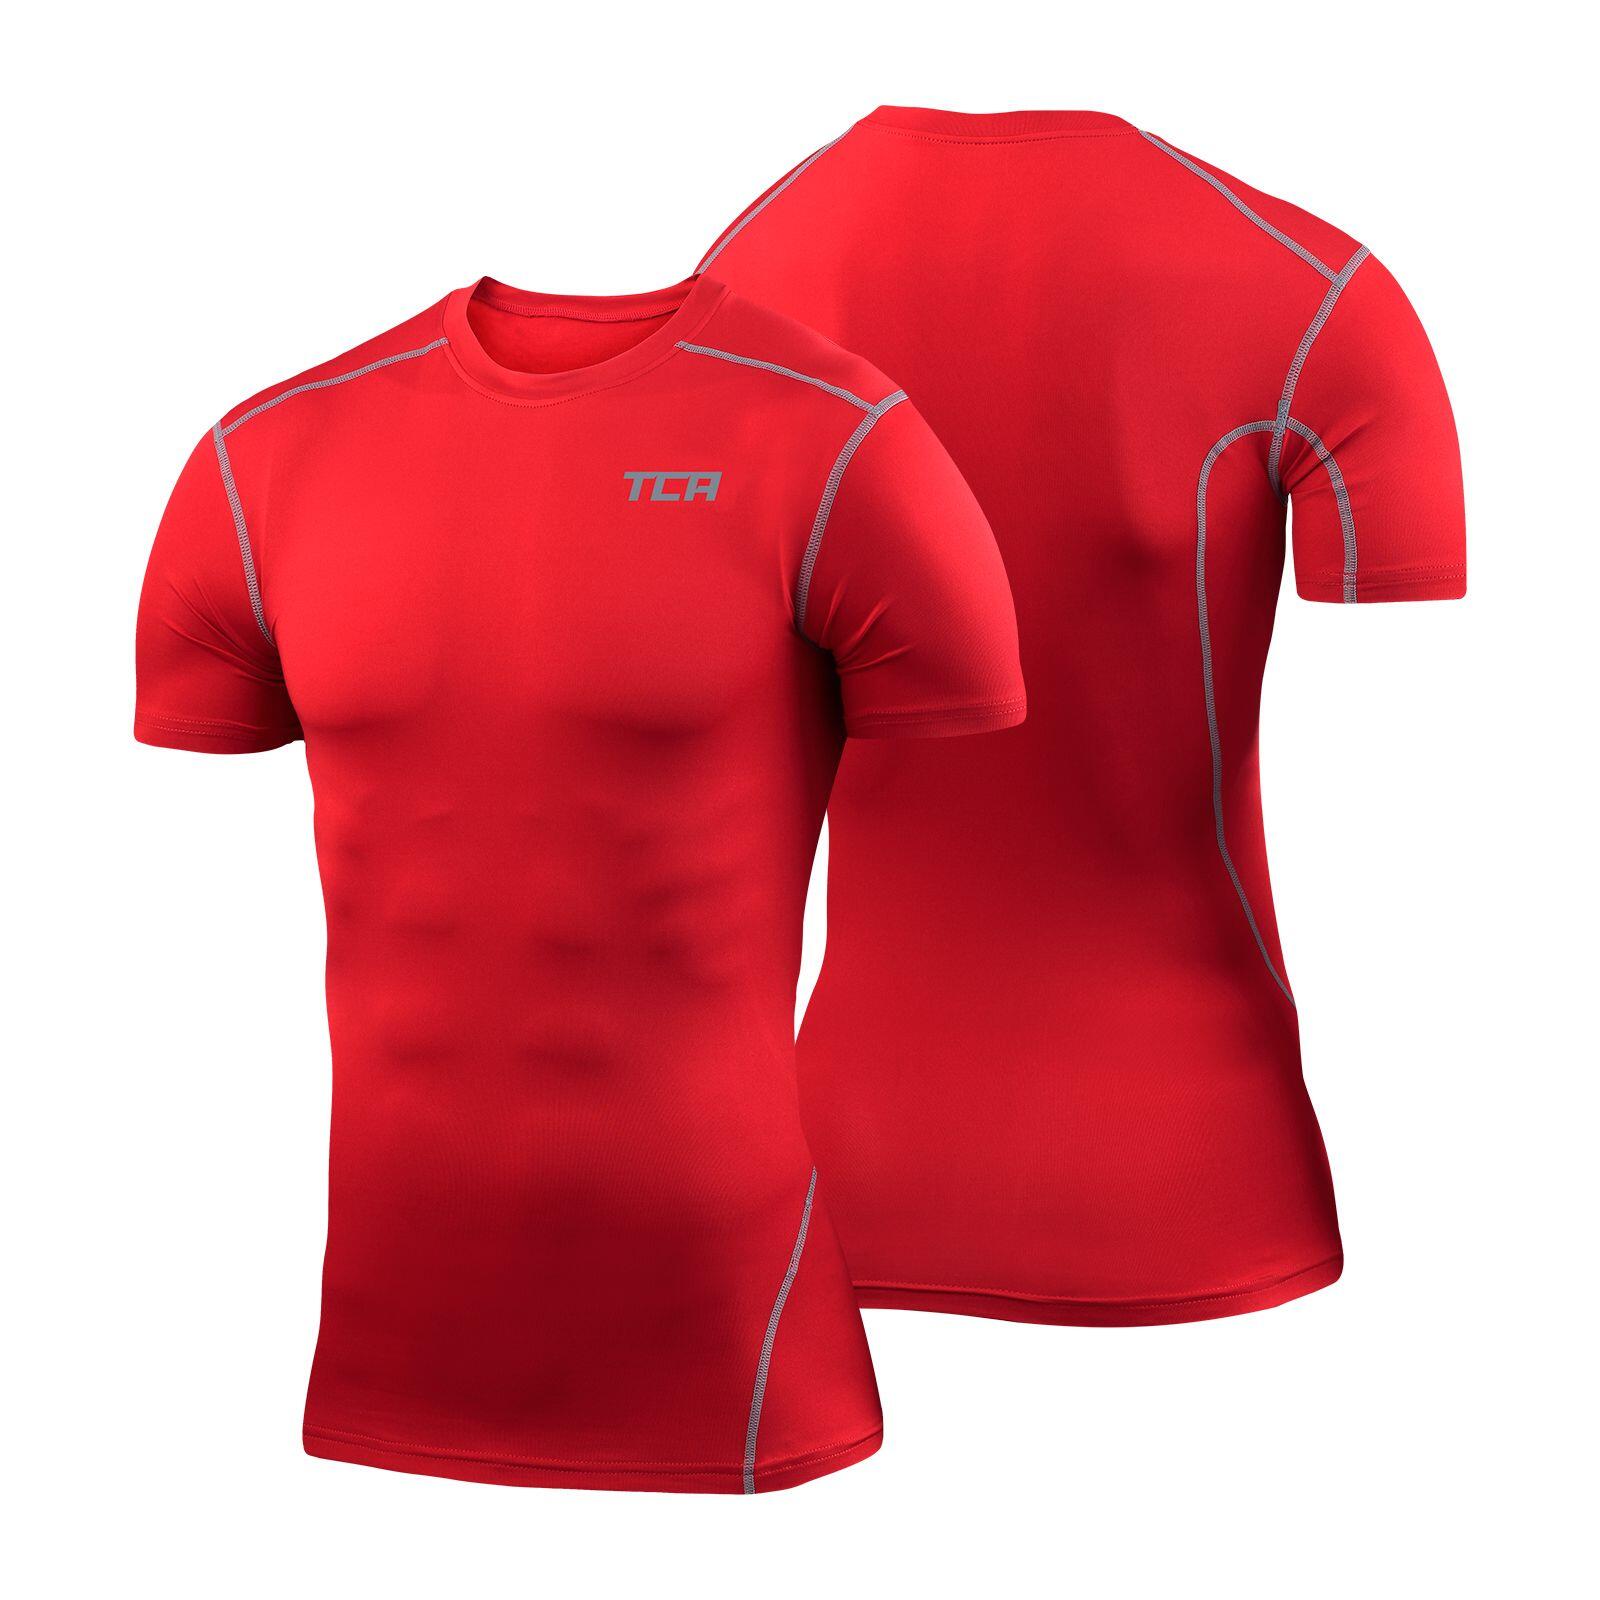 Boys' Performance Base Layer Compression T-shirt - Team Red 3/3